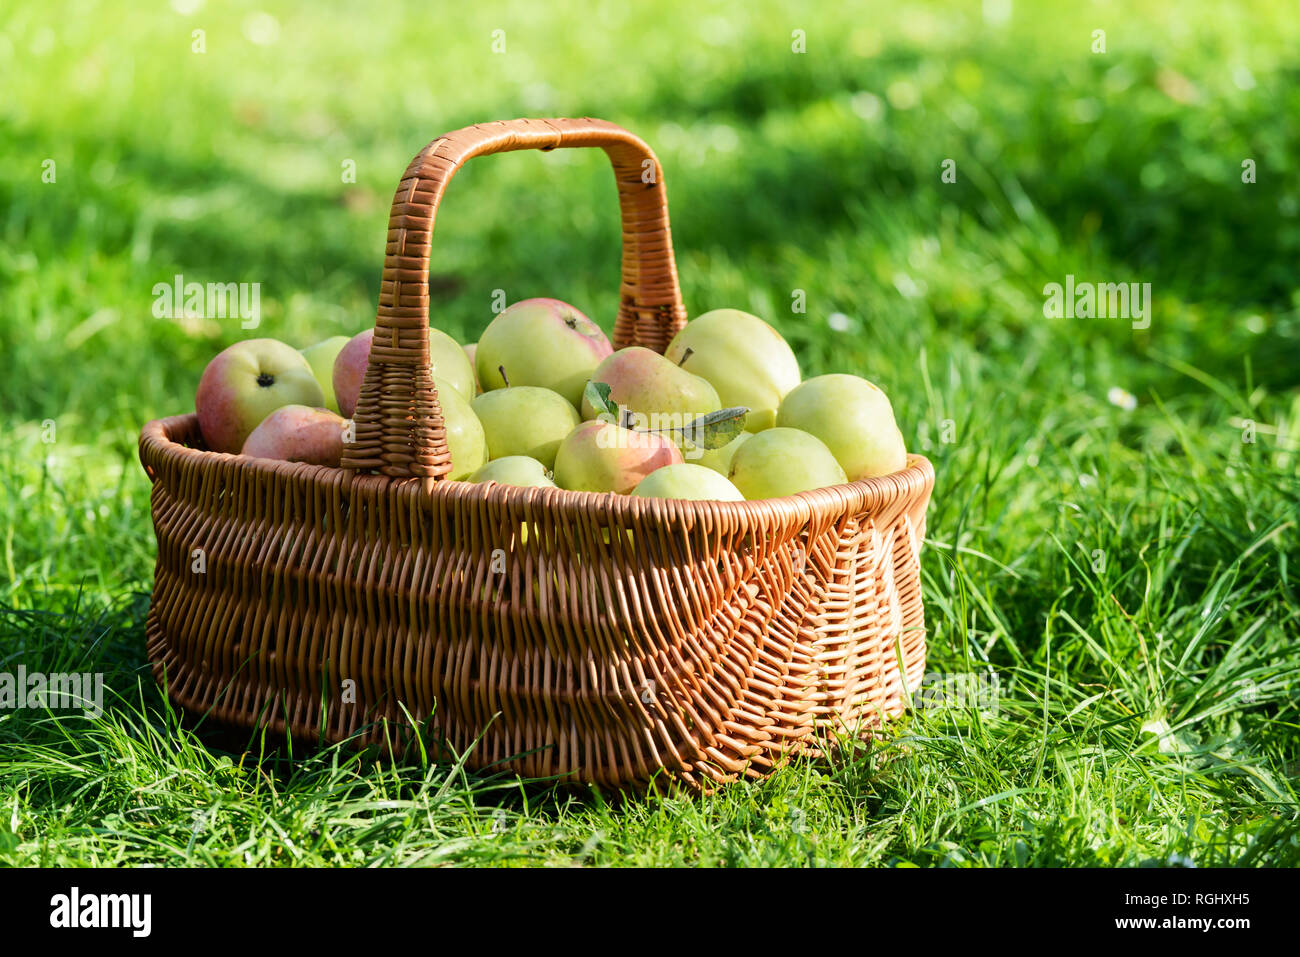 Basket with ripe apples on garden. Food and gardening concept Stock Photo